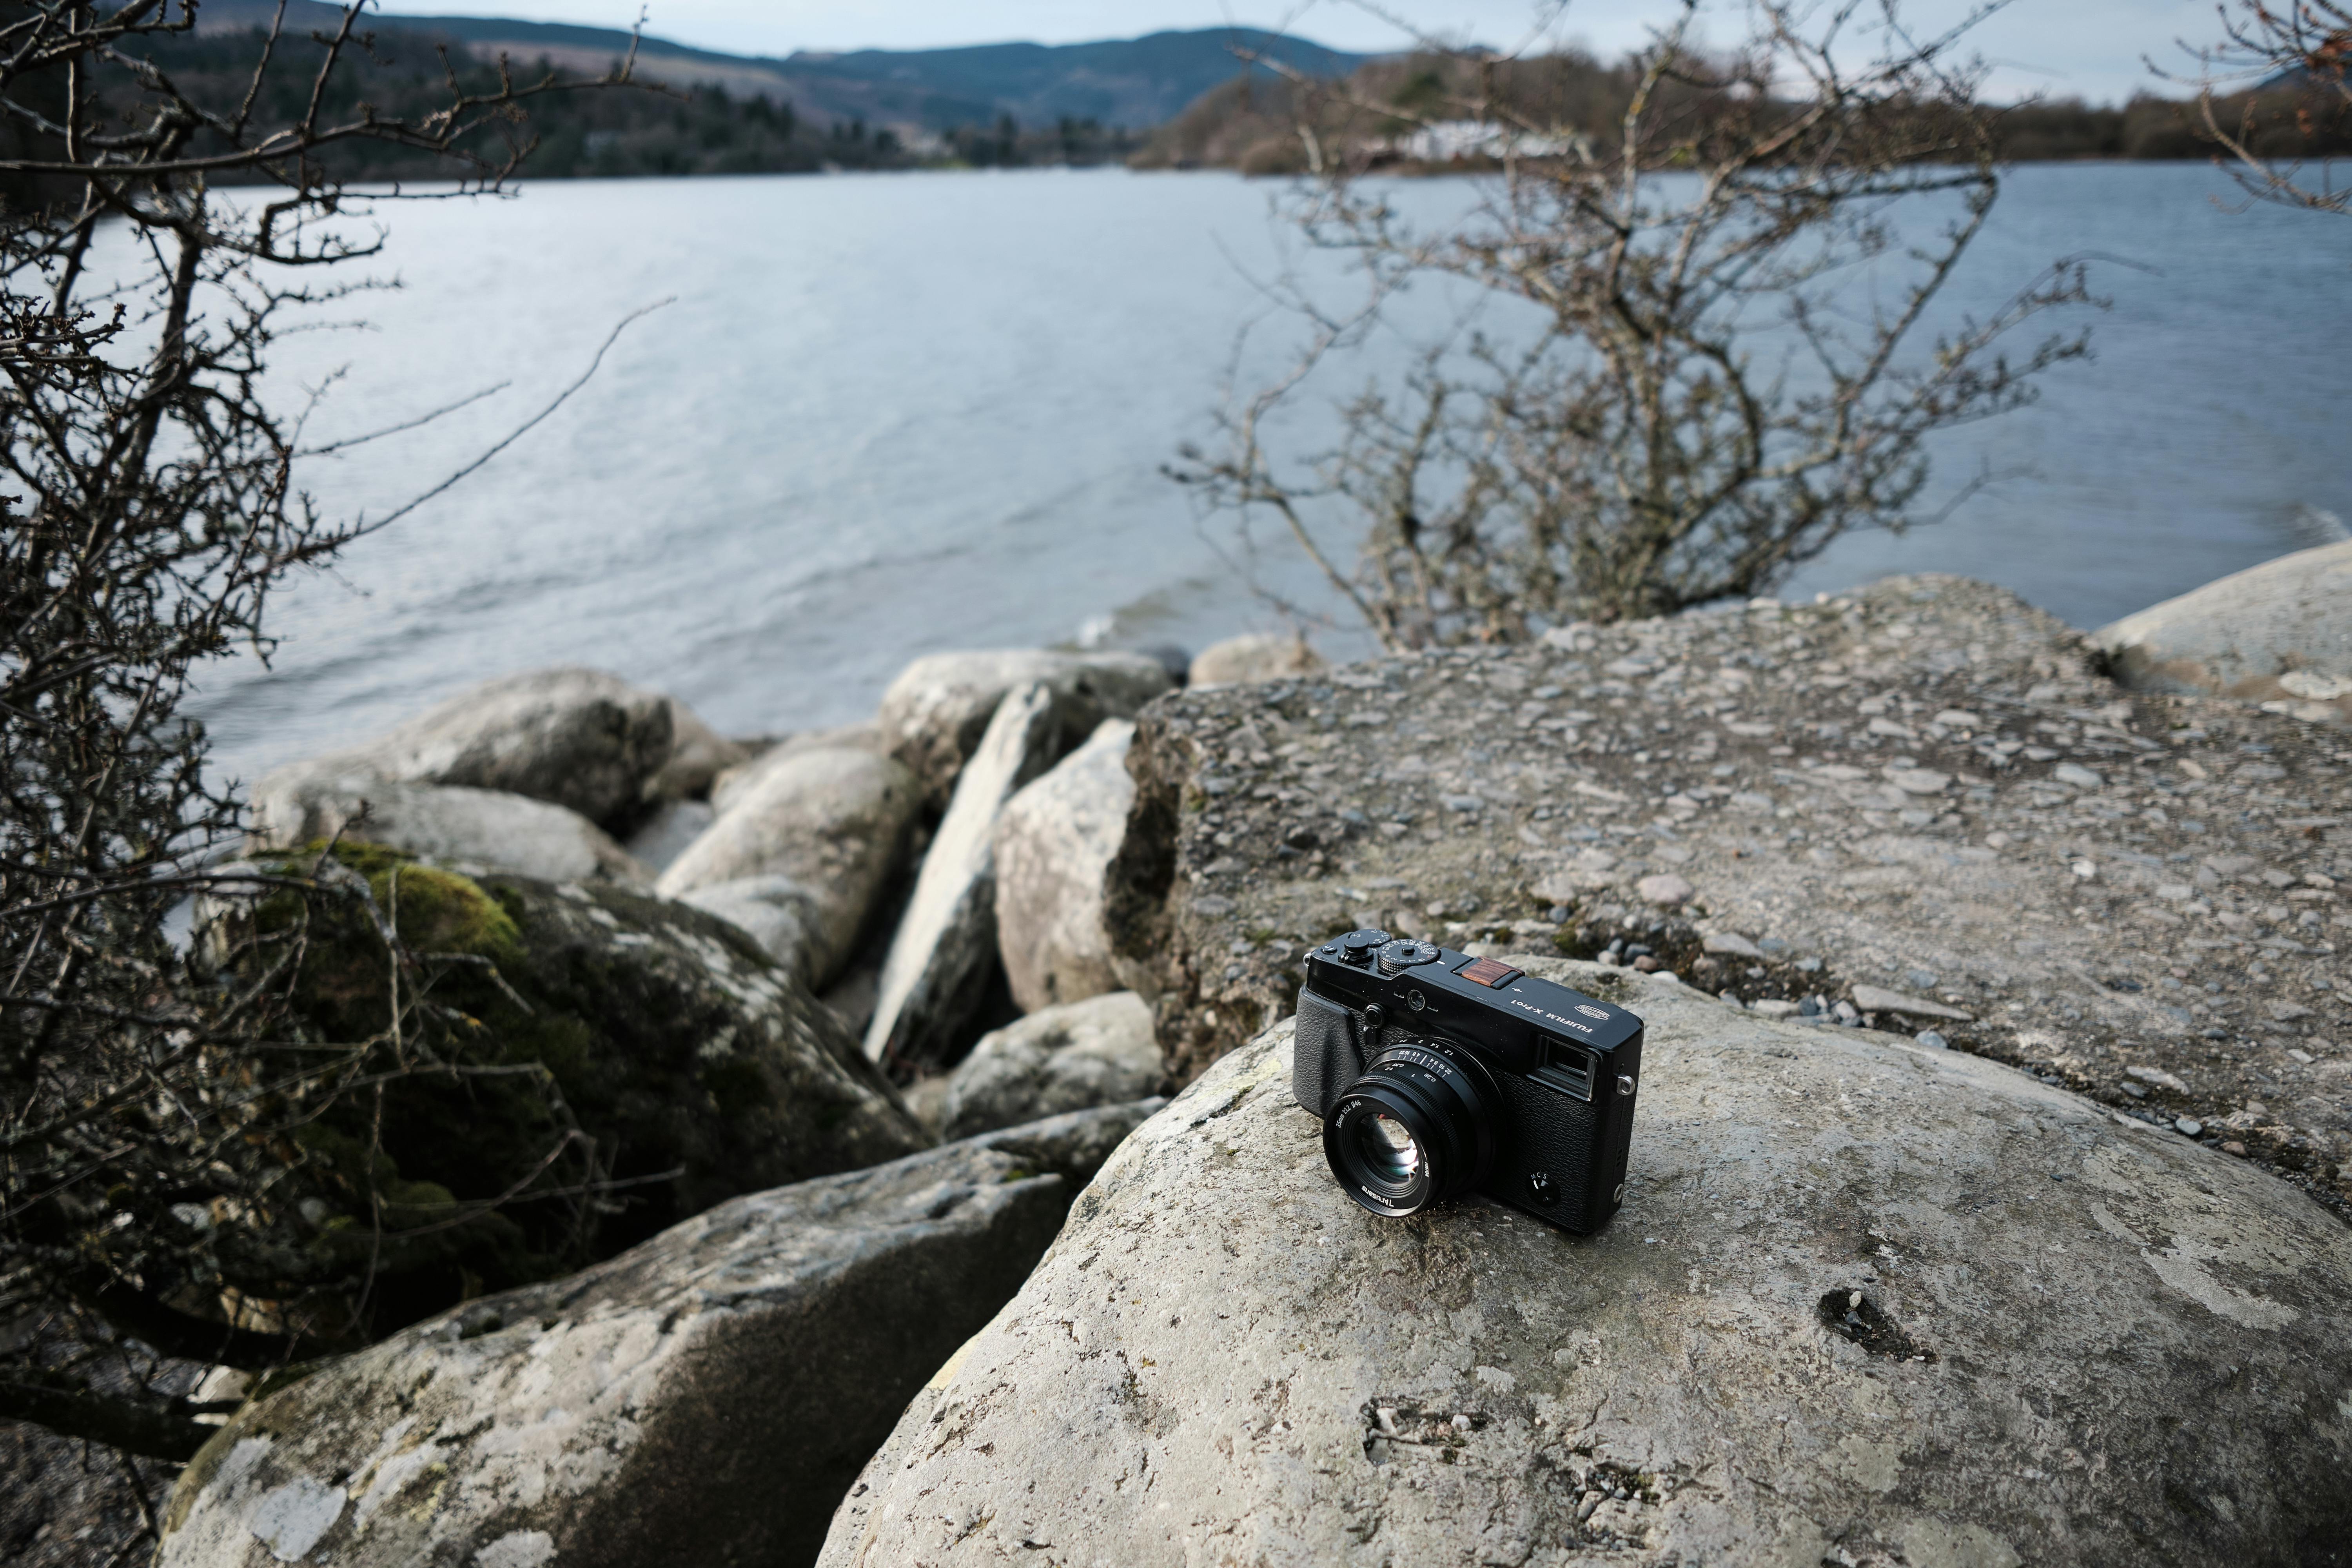 close up of a camera standing on a stone near a body of water